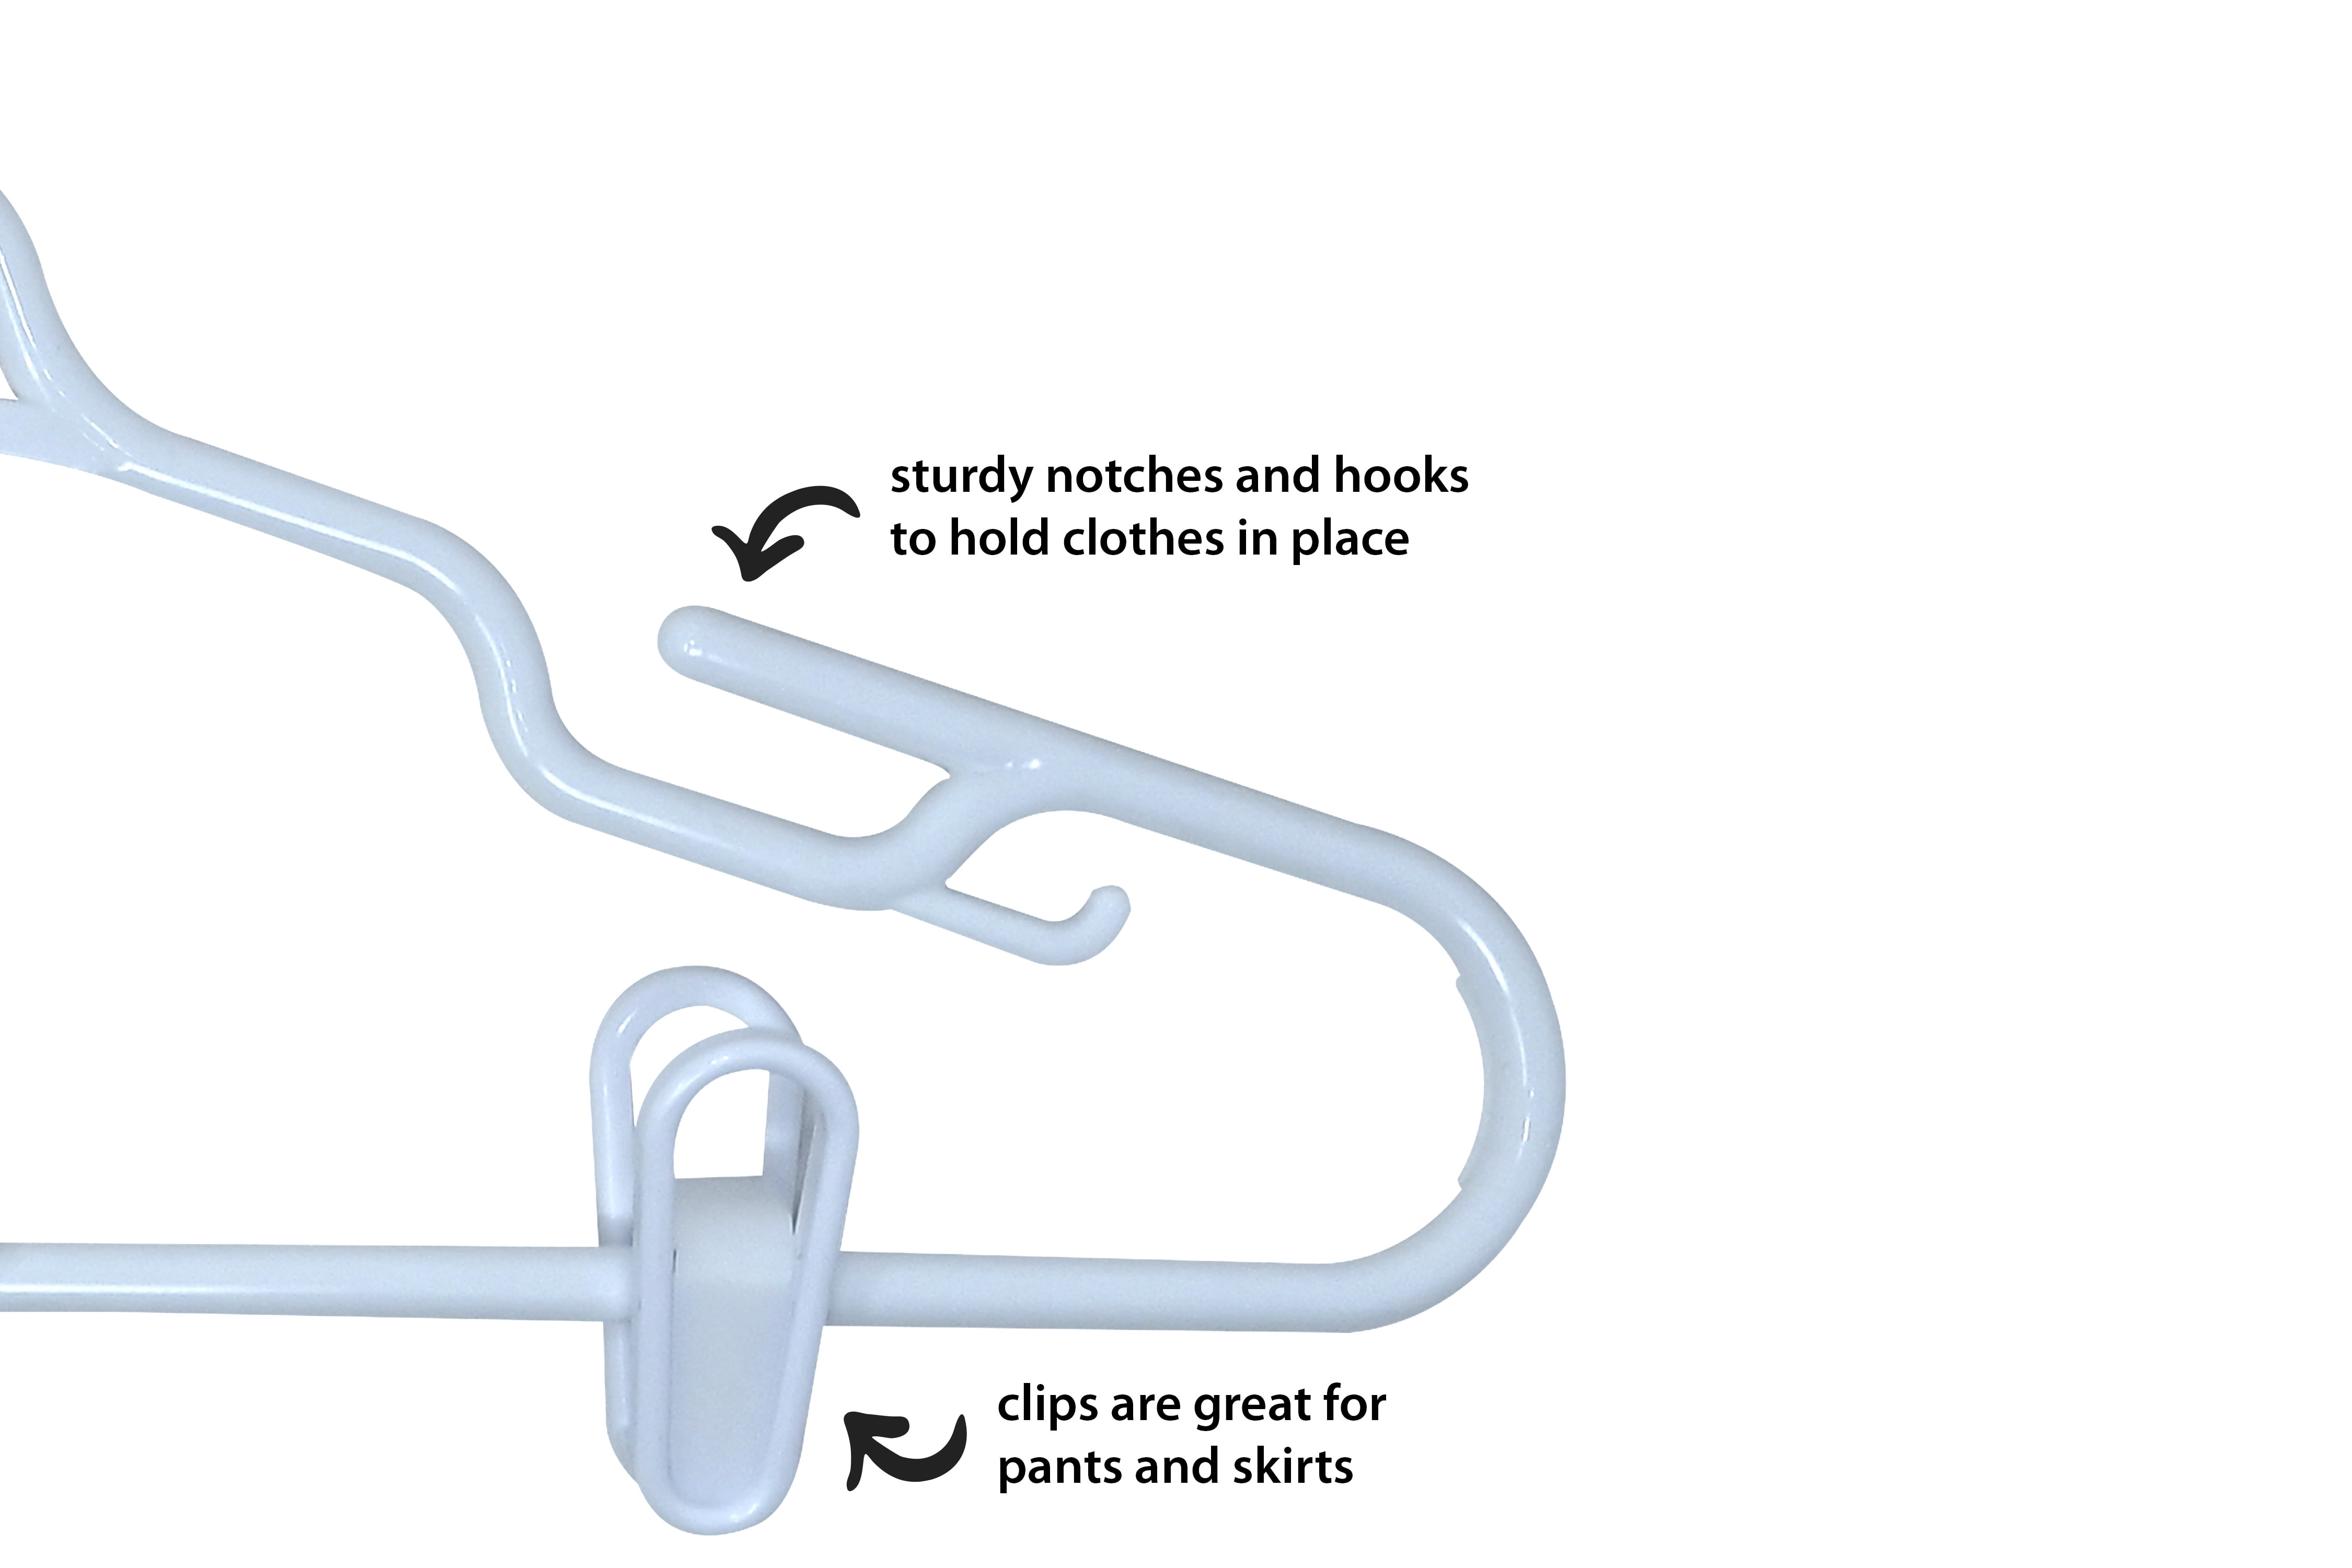 Clothes Hangers, Pack of 50 Plastic Coat Hangers, Non-Slip, Space-Saving,  360° Swivel Hook, White and Dark Gray for Sale in West Covina, CA - OfferUp